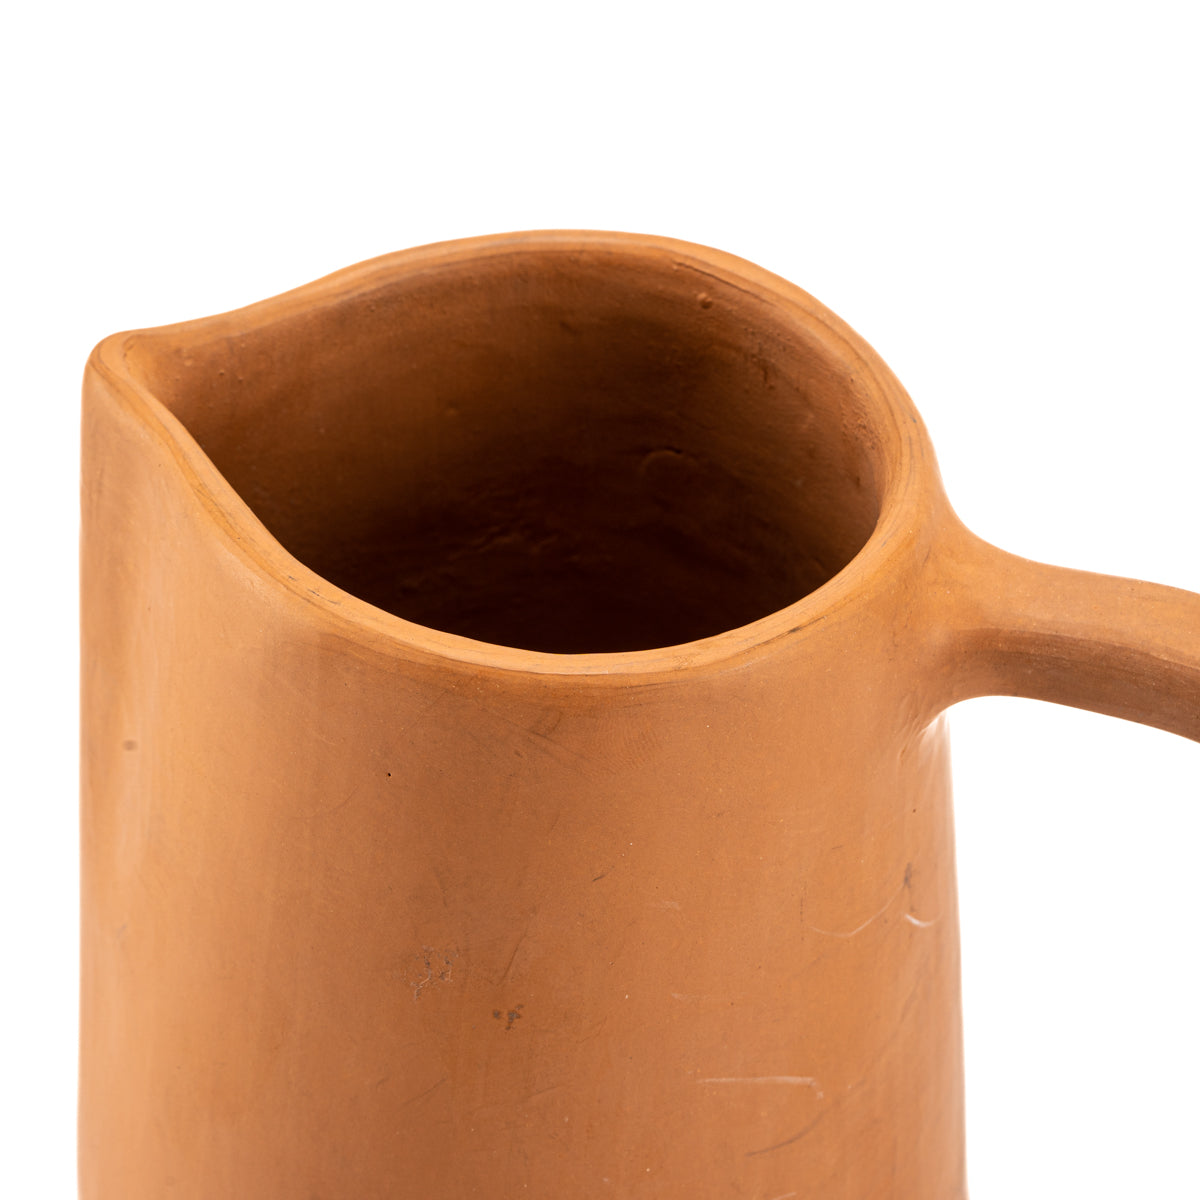 Amando Handcrafted Terracota Clay Water Pitcher